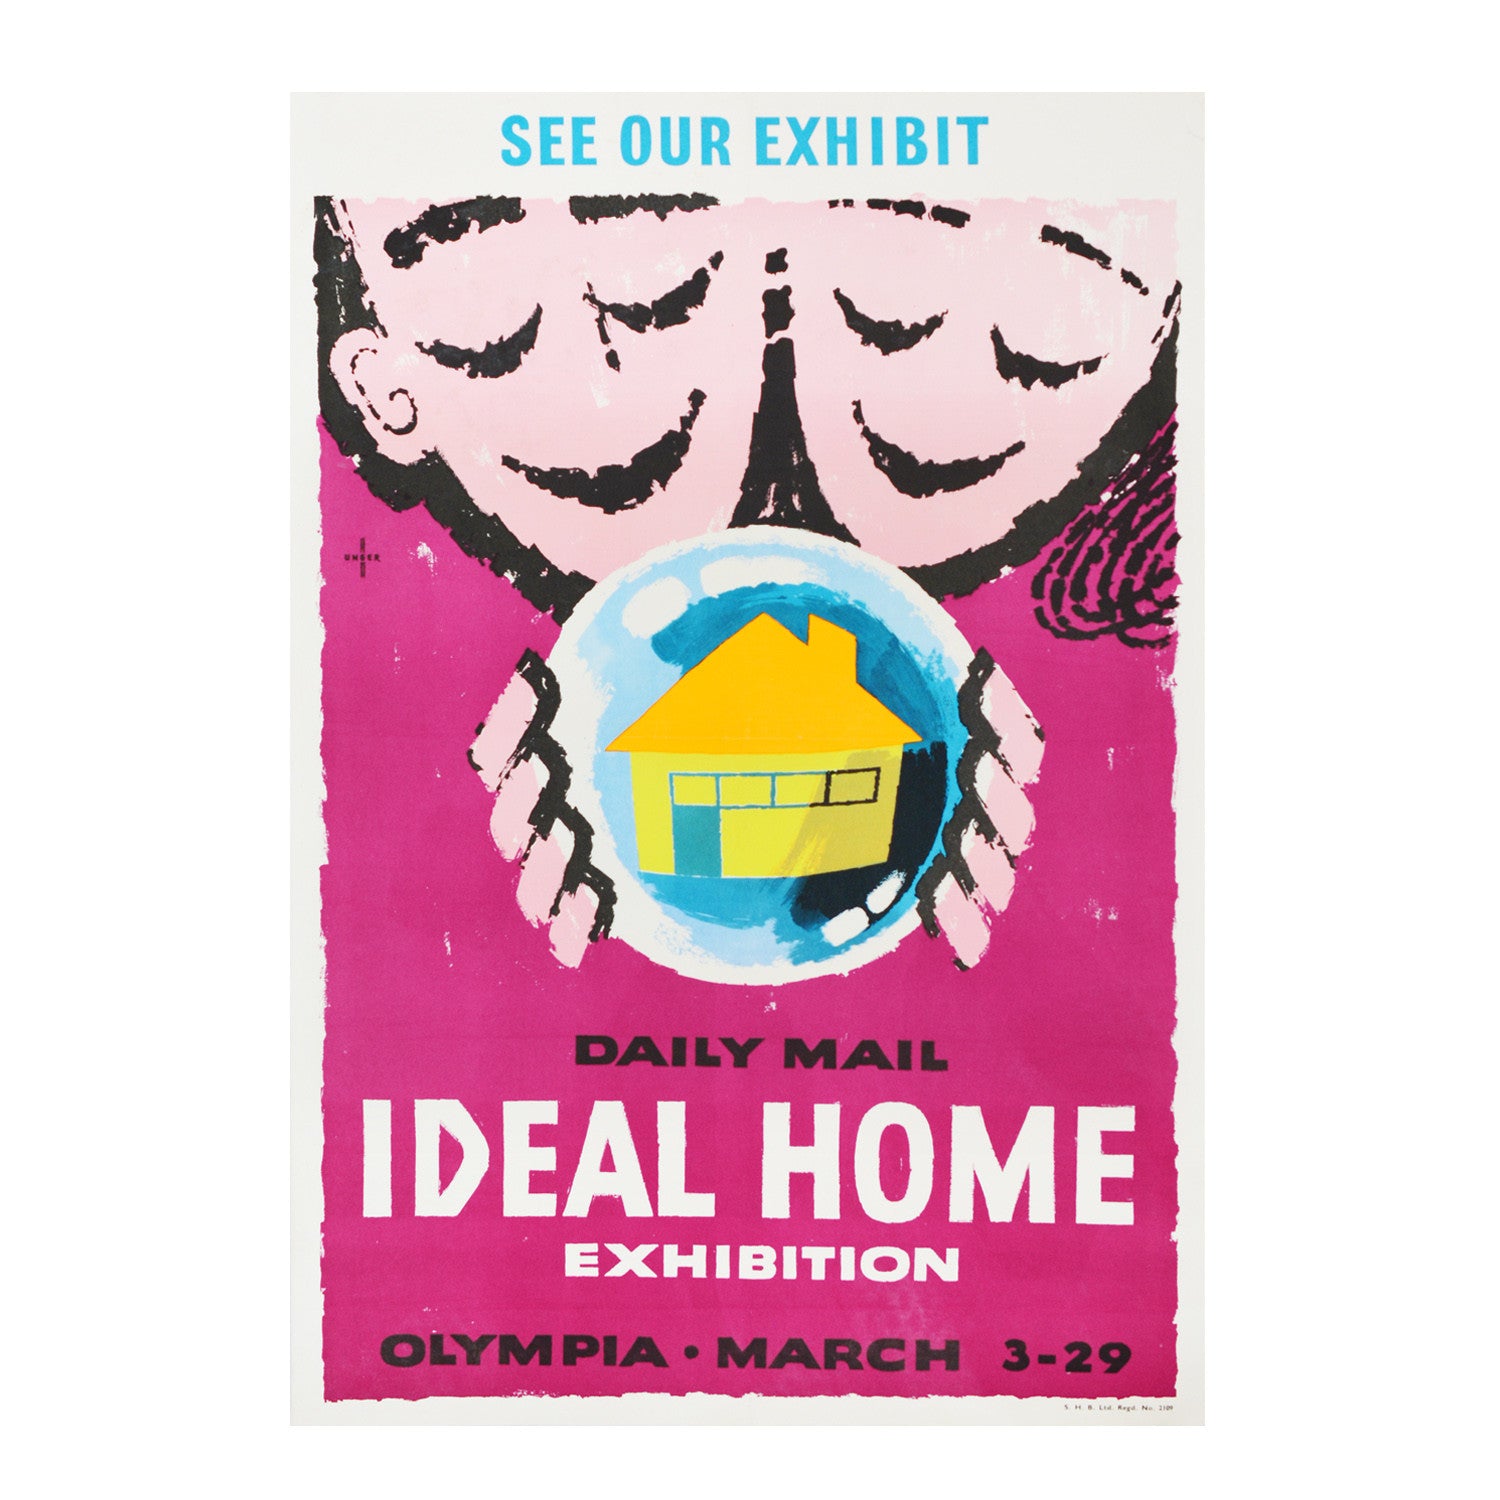 Daily Mail Ideal Home Exhibition